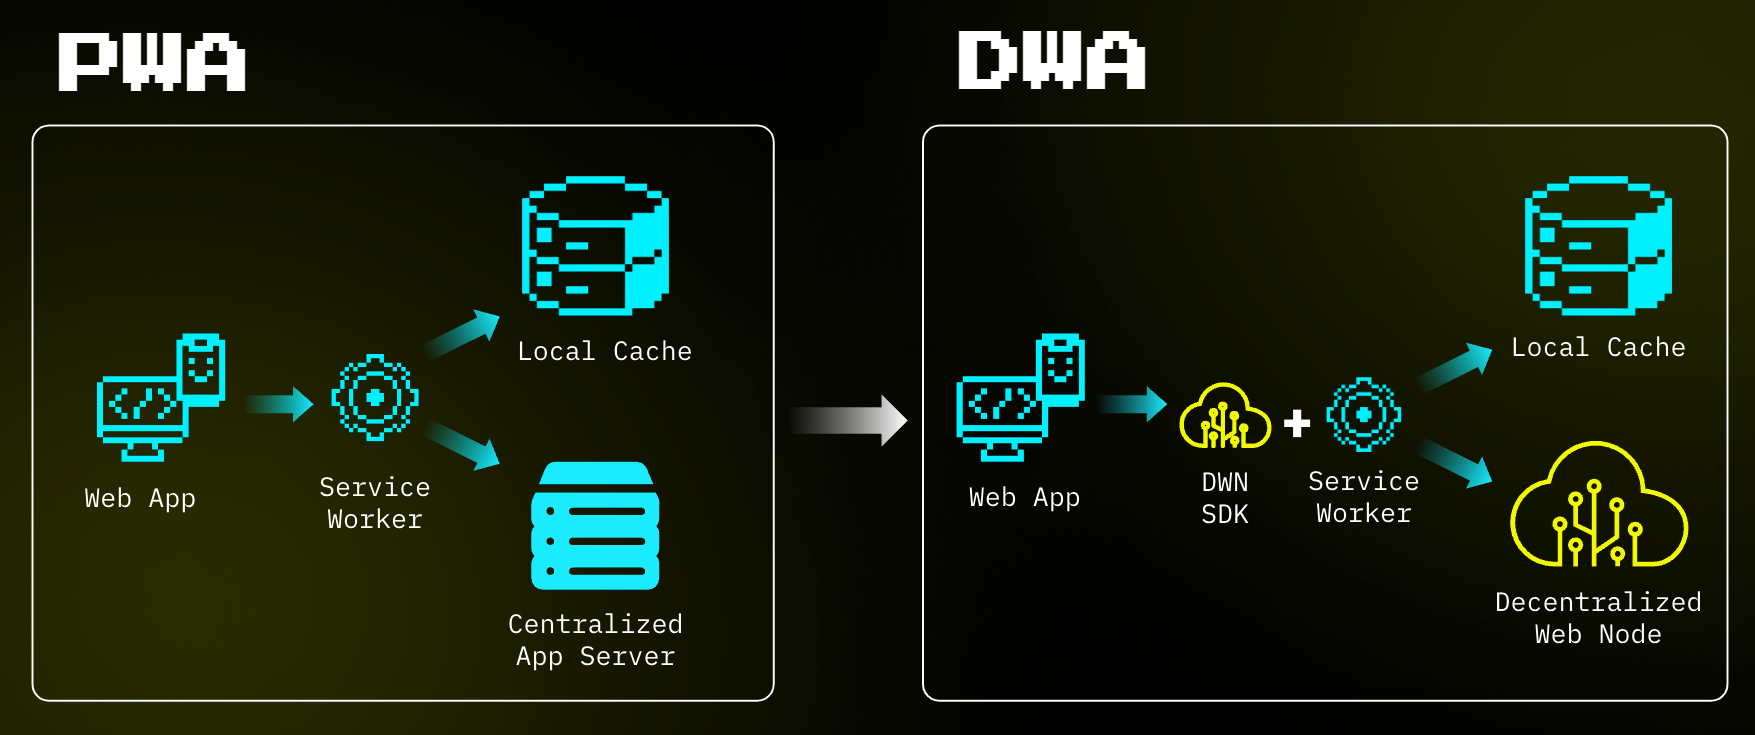 Illustration of PWAs compared to DWAs. PWAs comprise of a web app that uses a service worker to pull from local cache and a centralized app server; whereas DWAs comprise of a DWN SDK and a service worker that pull from local cache and Decentralized Web Nodes.